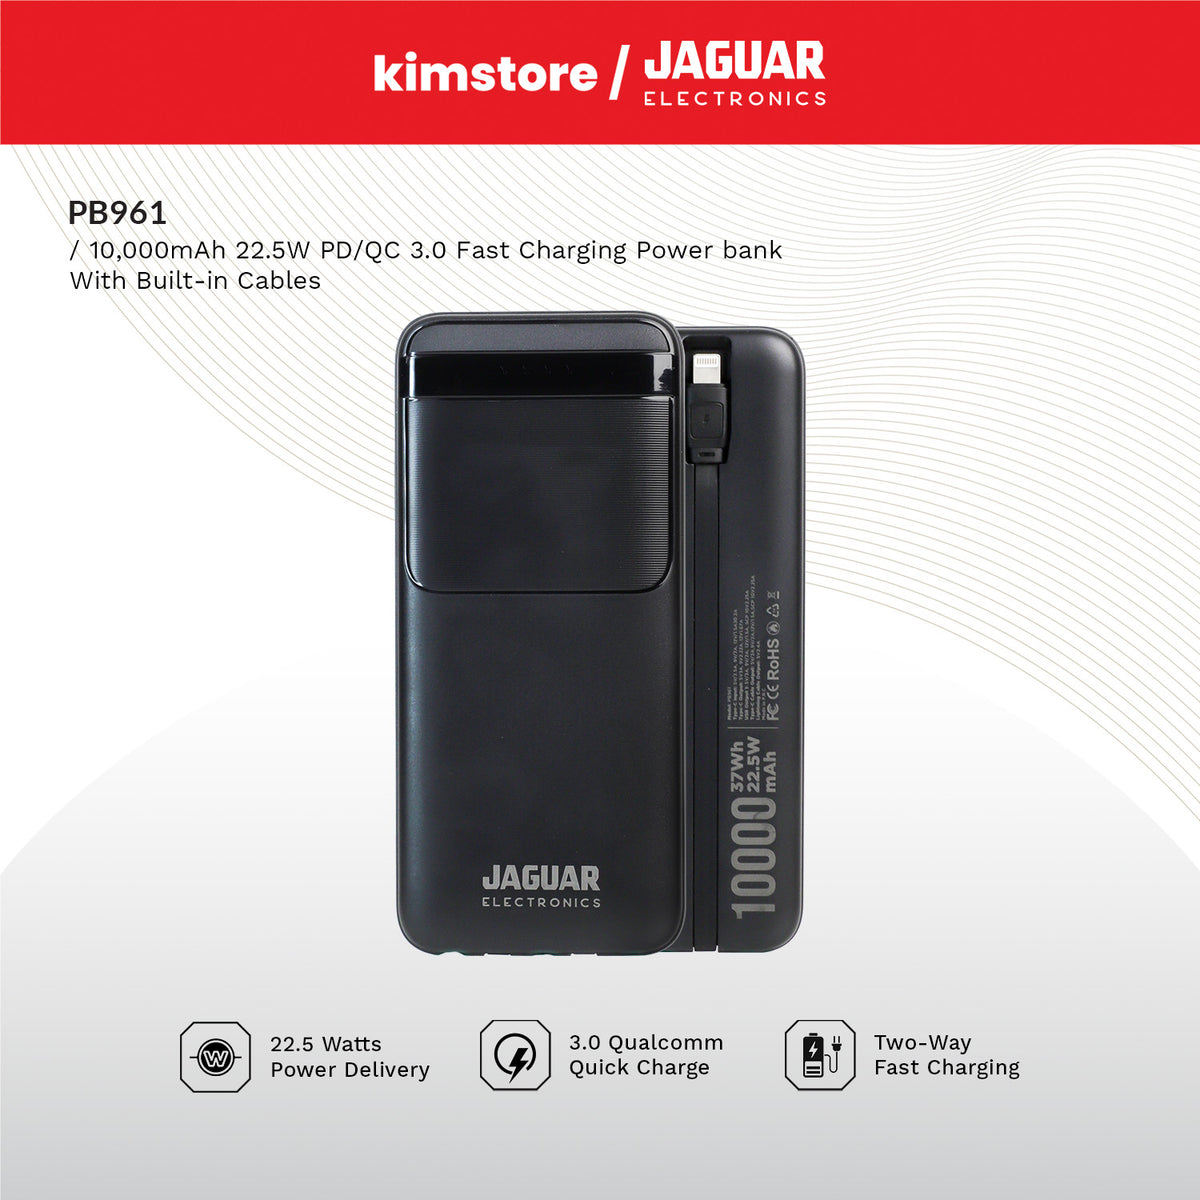 Jaguar Electronics PB961 10000mAh 22.5W PD/QC 3.0 Fast Charging Power bank With Built-in Cables